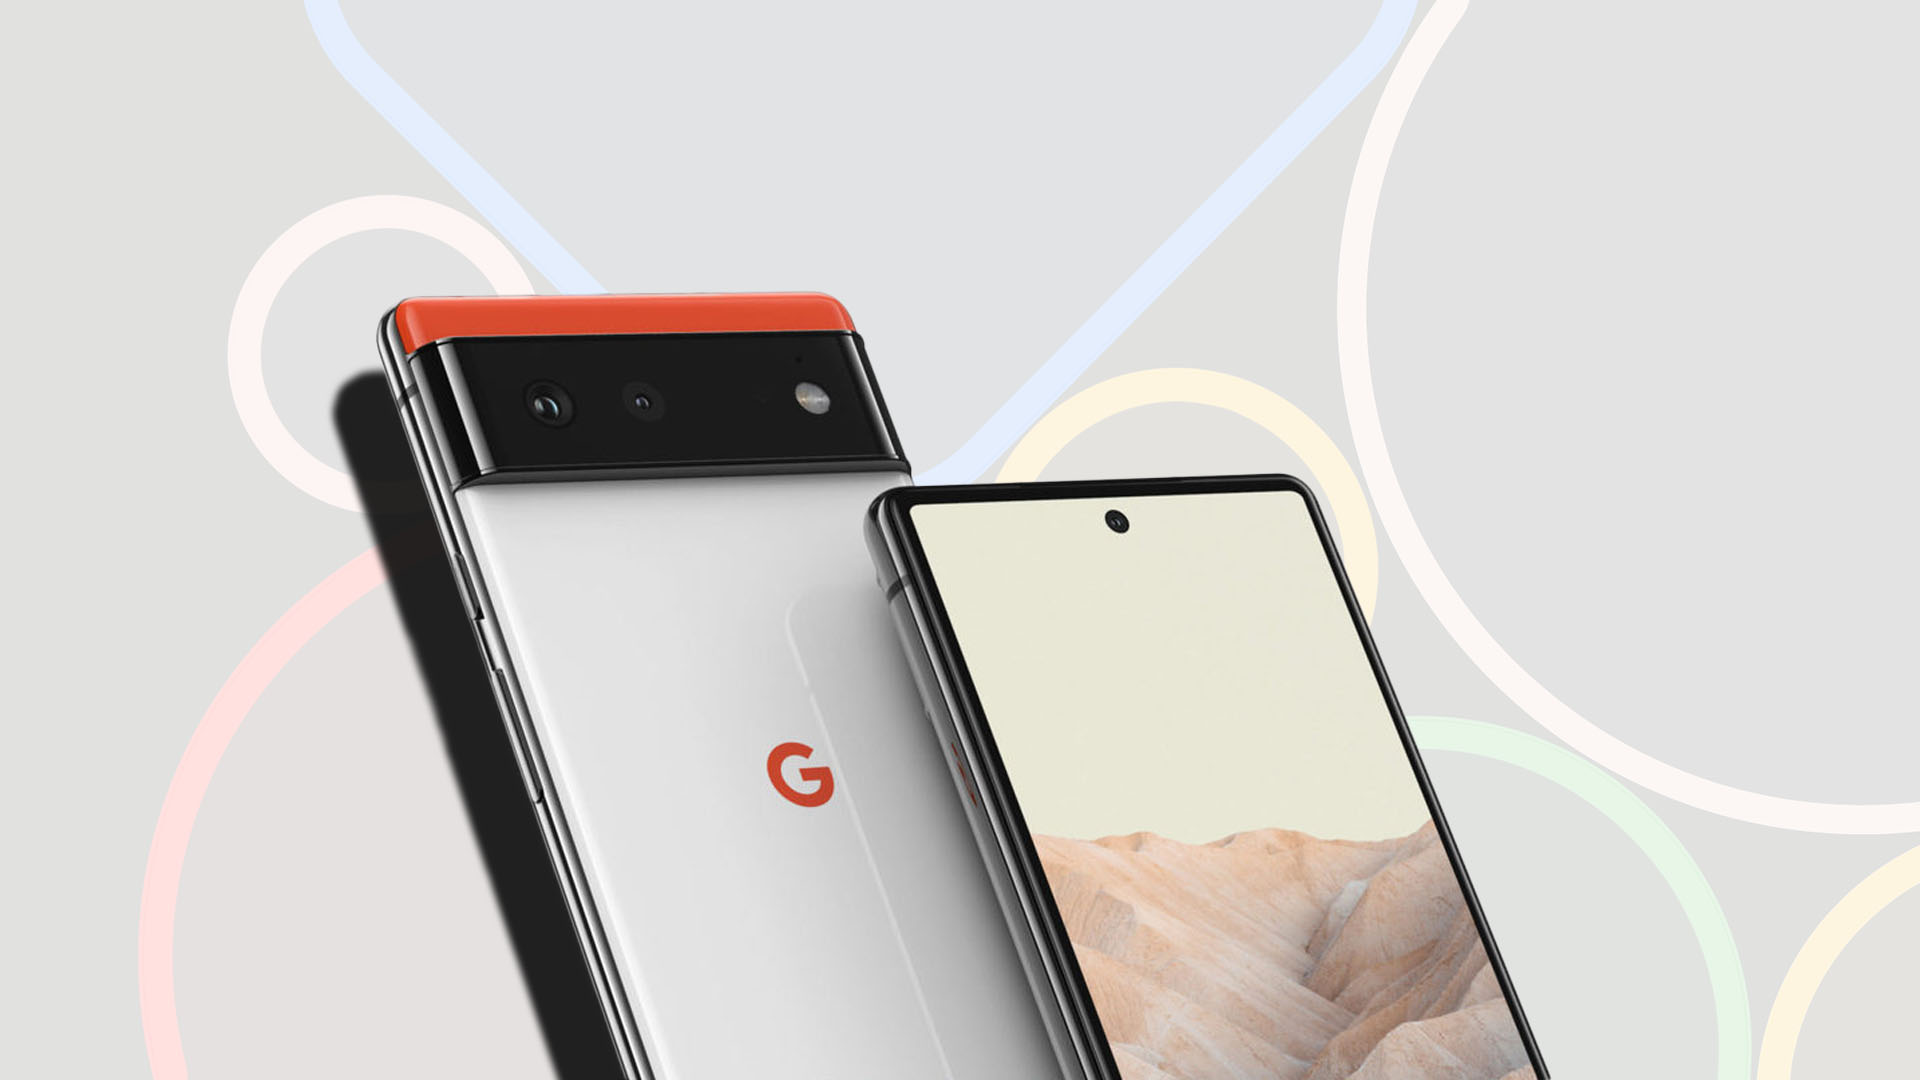 Google has high hopes for Pixel 6: production of new smartphones increased by 50%